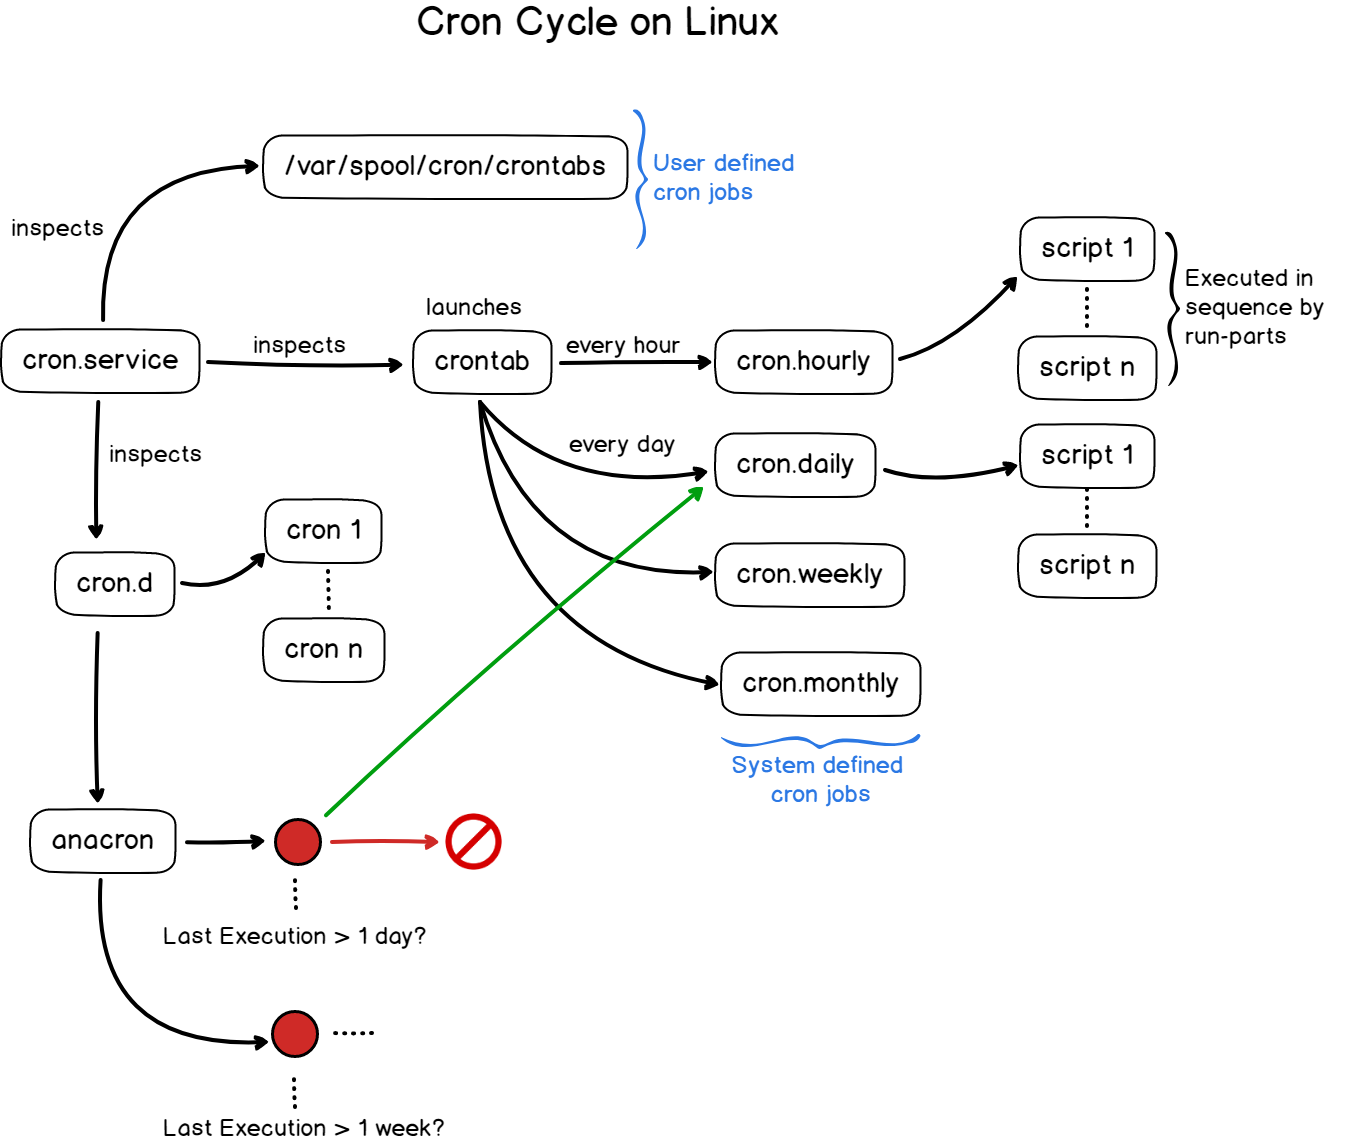 Cron cycle on Linux